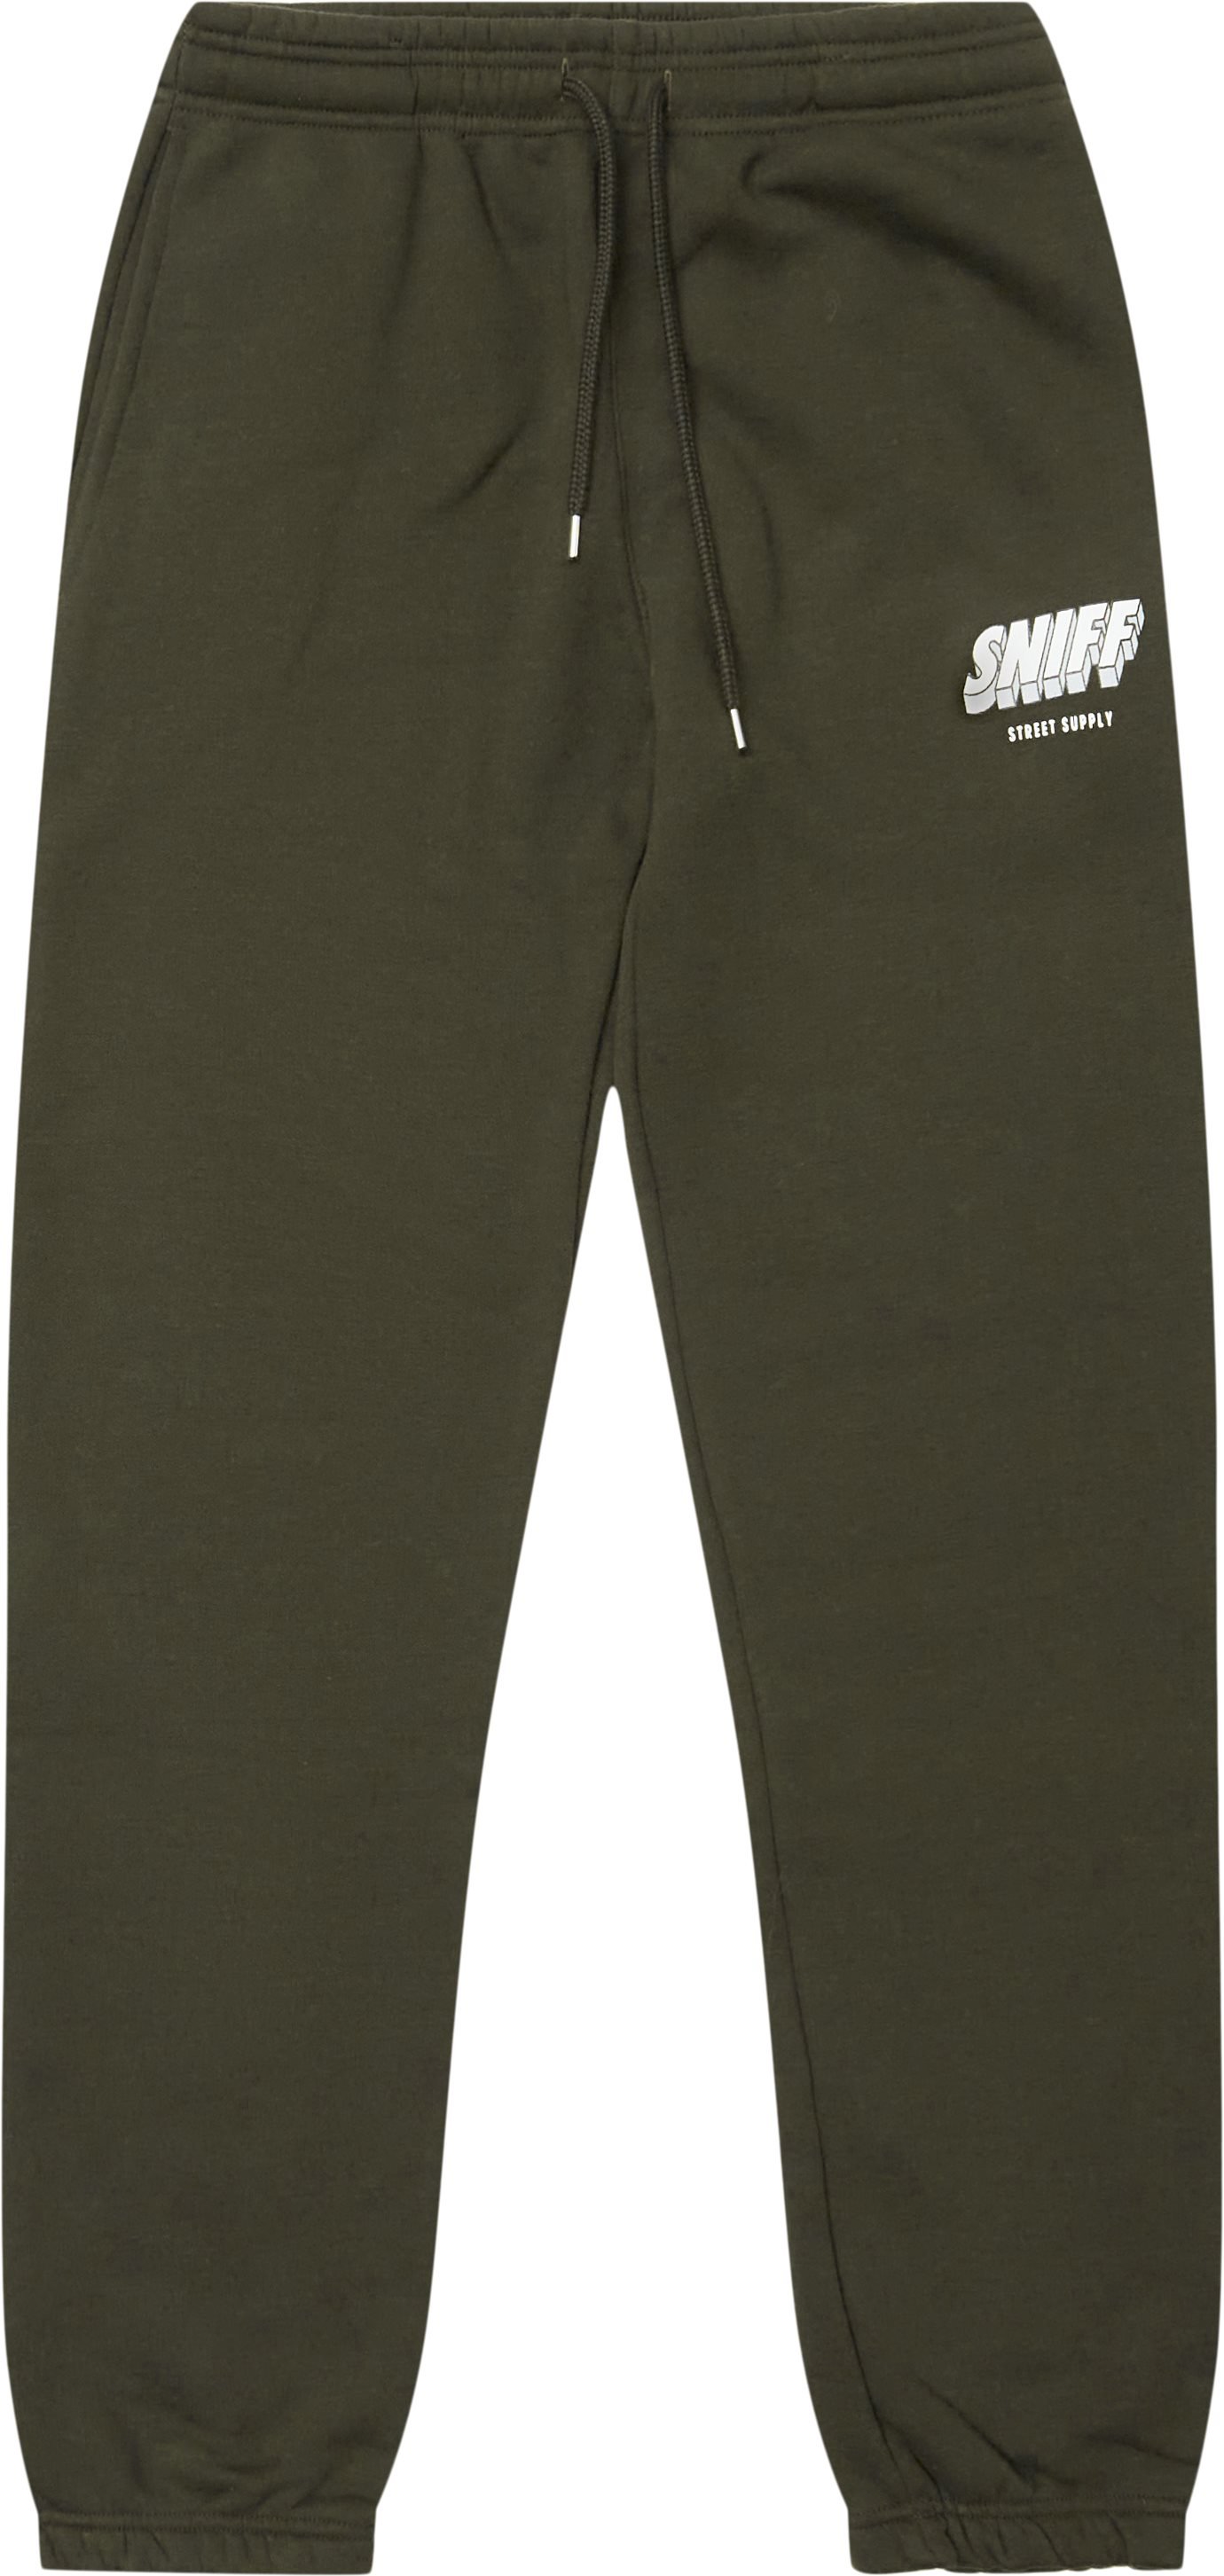 Le Roy Sweatpants - Trousers - Regular fit - Army